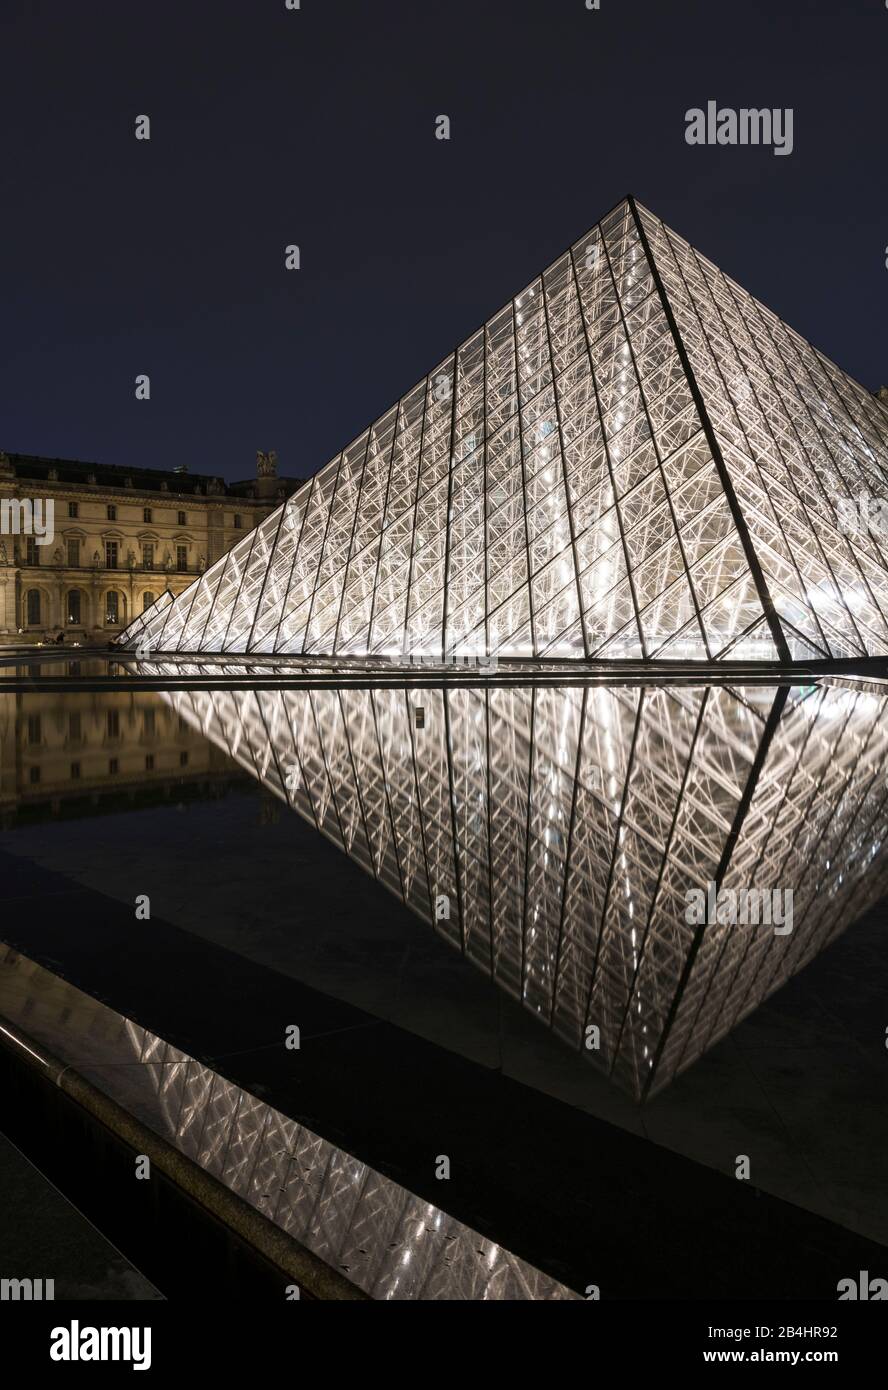 Glass pyramid illuminated at night in the Louvre reflected in the water, Paris, France, Europe Stock Photo